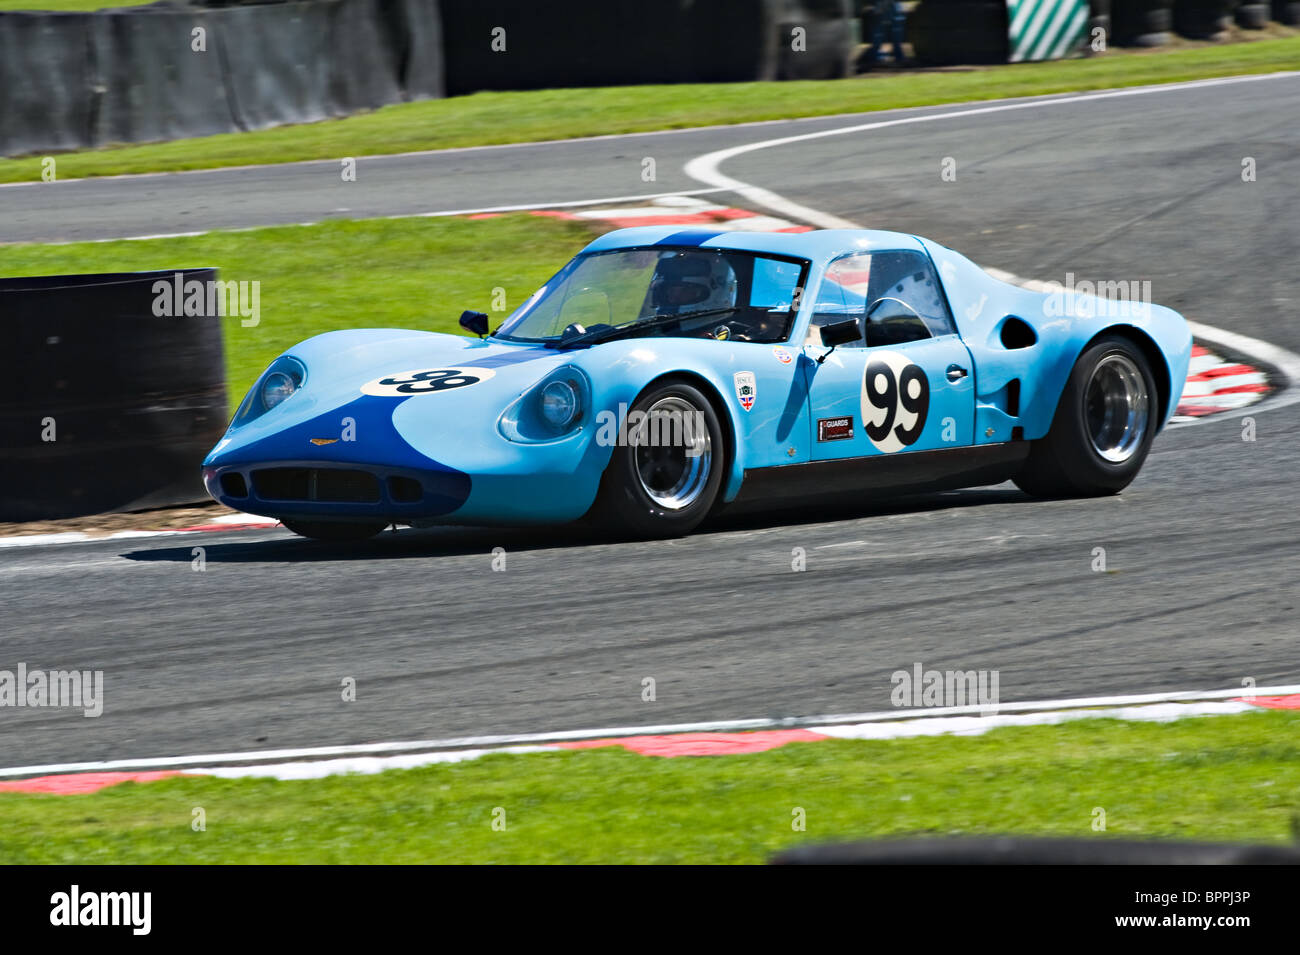 Chevron B8 Sports Race Car in Guards Trophy Race at Oulton Park Motor Racing Circuit Cheshire England United Kingdom UK Stock Photo